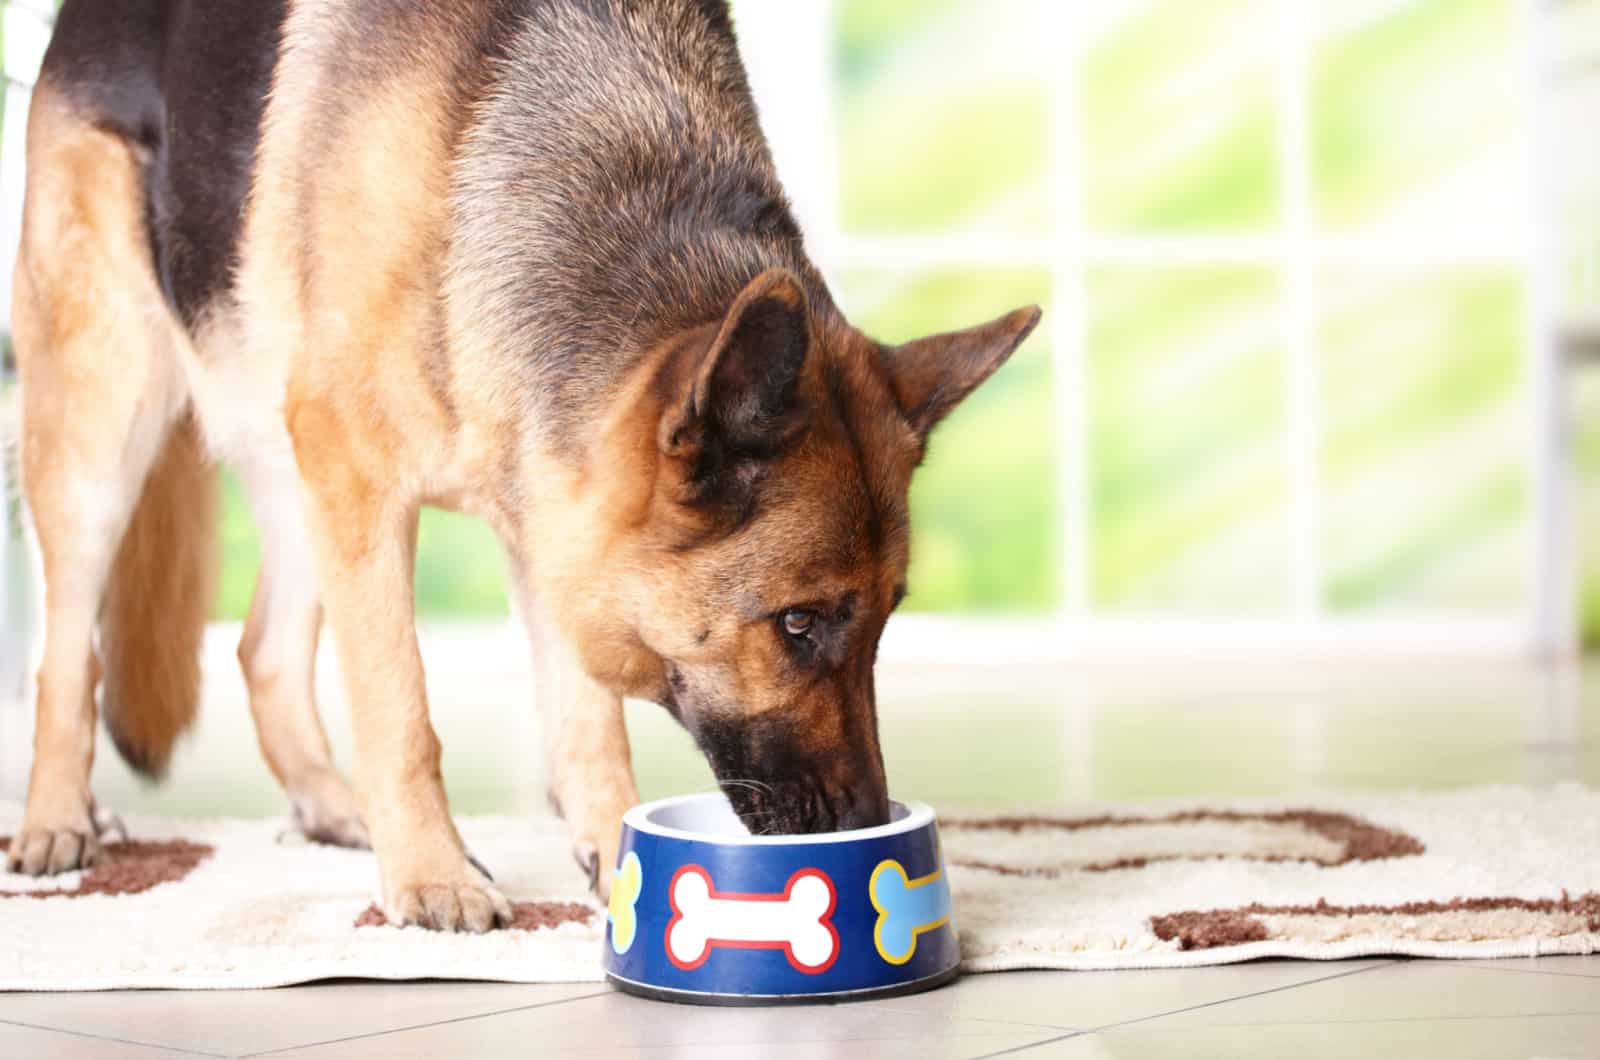 gsd eating food from a bowl